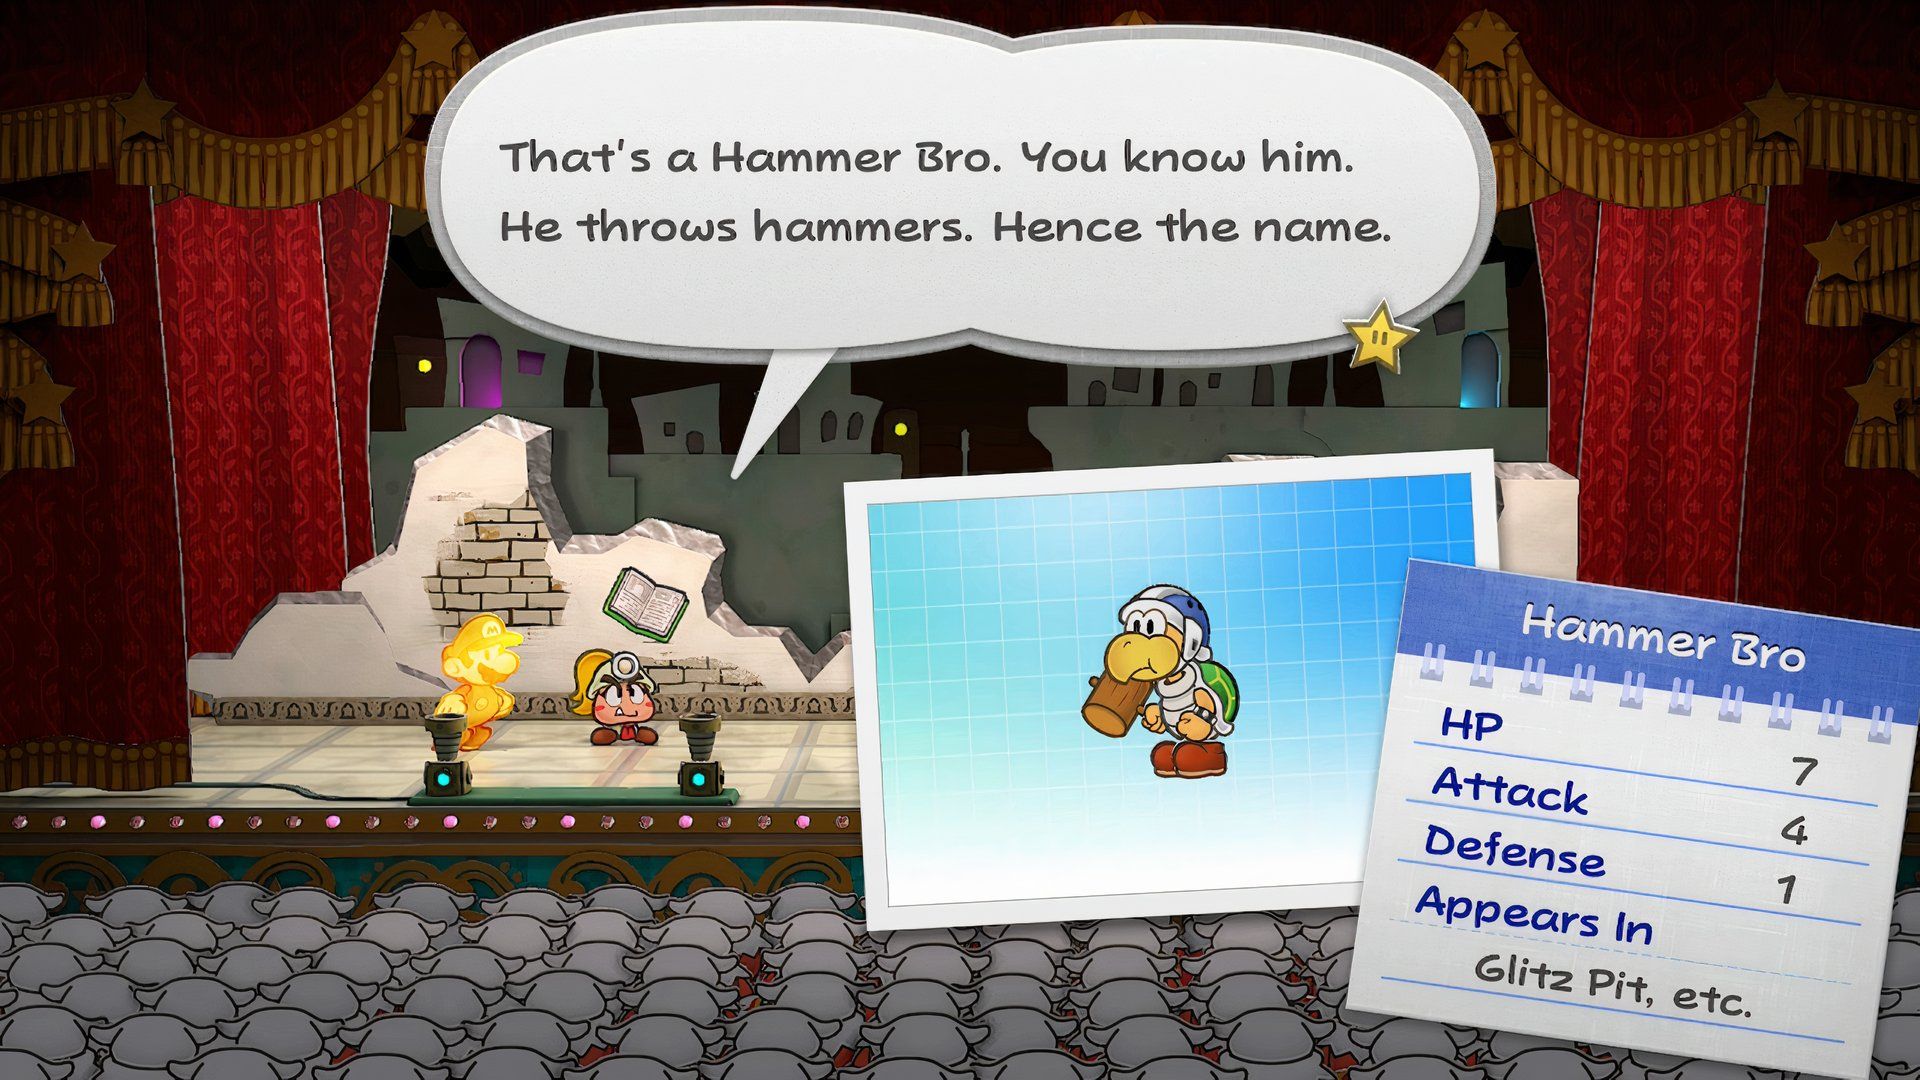 Paper Mario: The Thousand-Year Door - Tattle Log for Hammer Bro